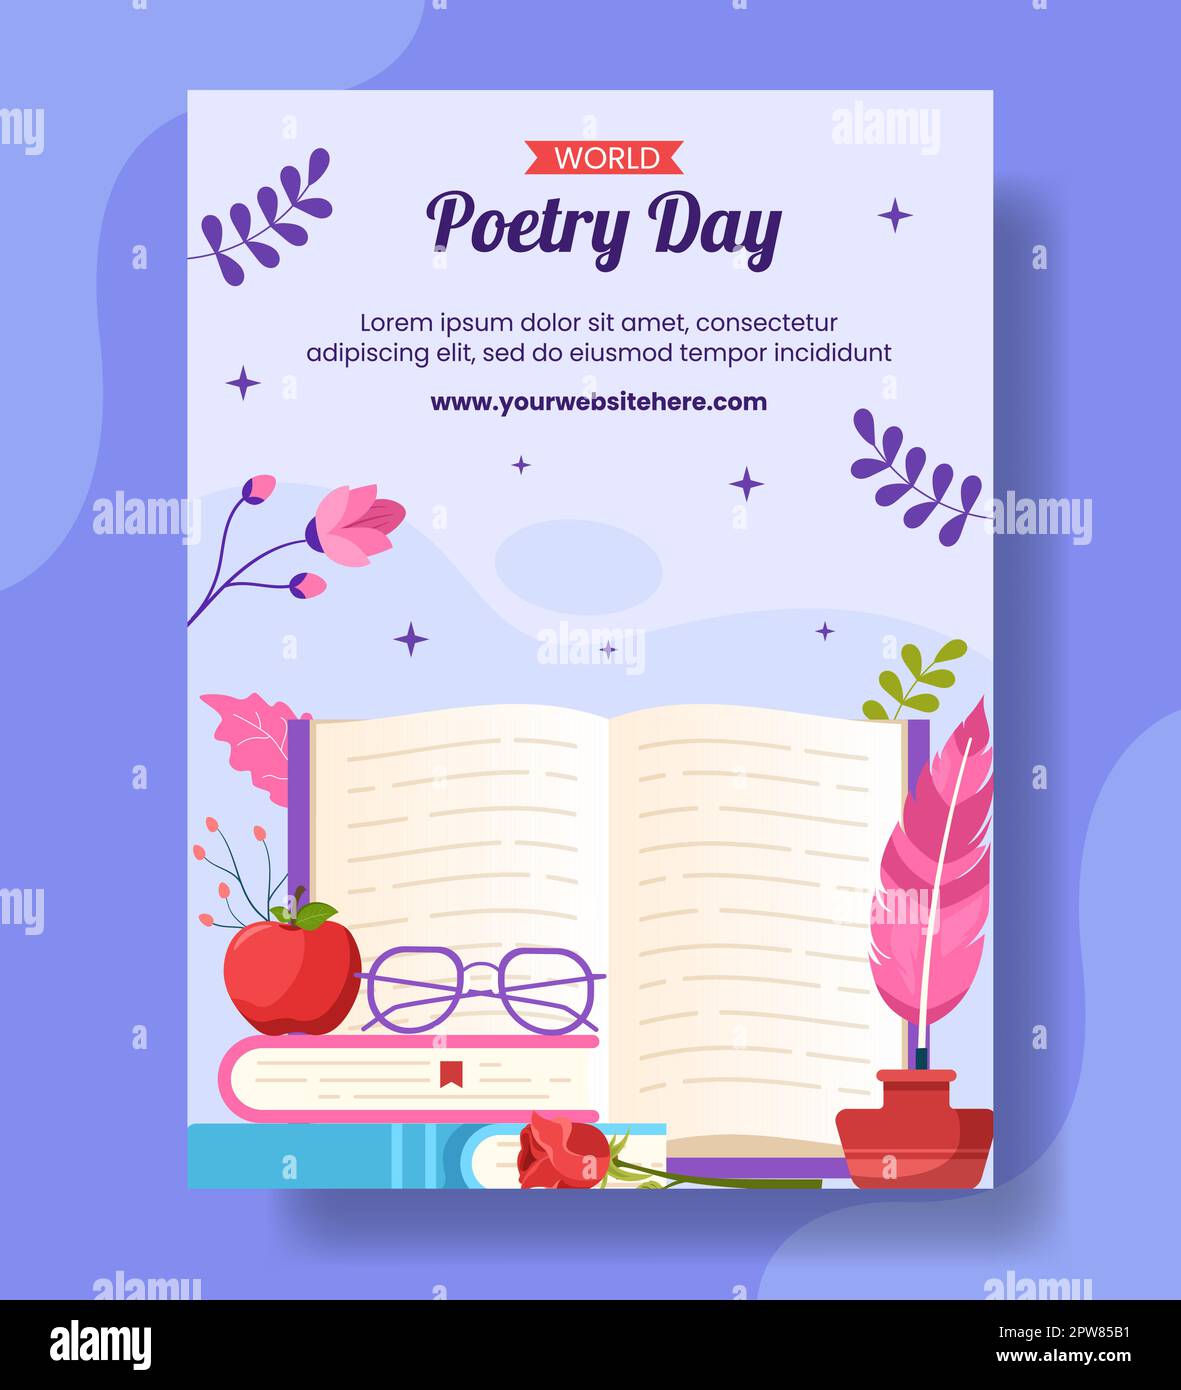 World Poetry Day Vertical Poster with Paper and Quill Flat Cartoon Hand Drawn Templates Illustration Stock Vector